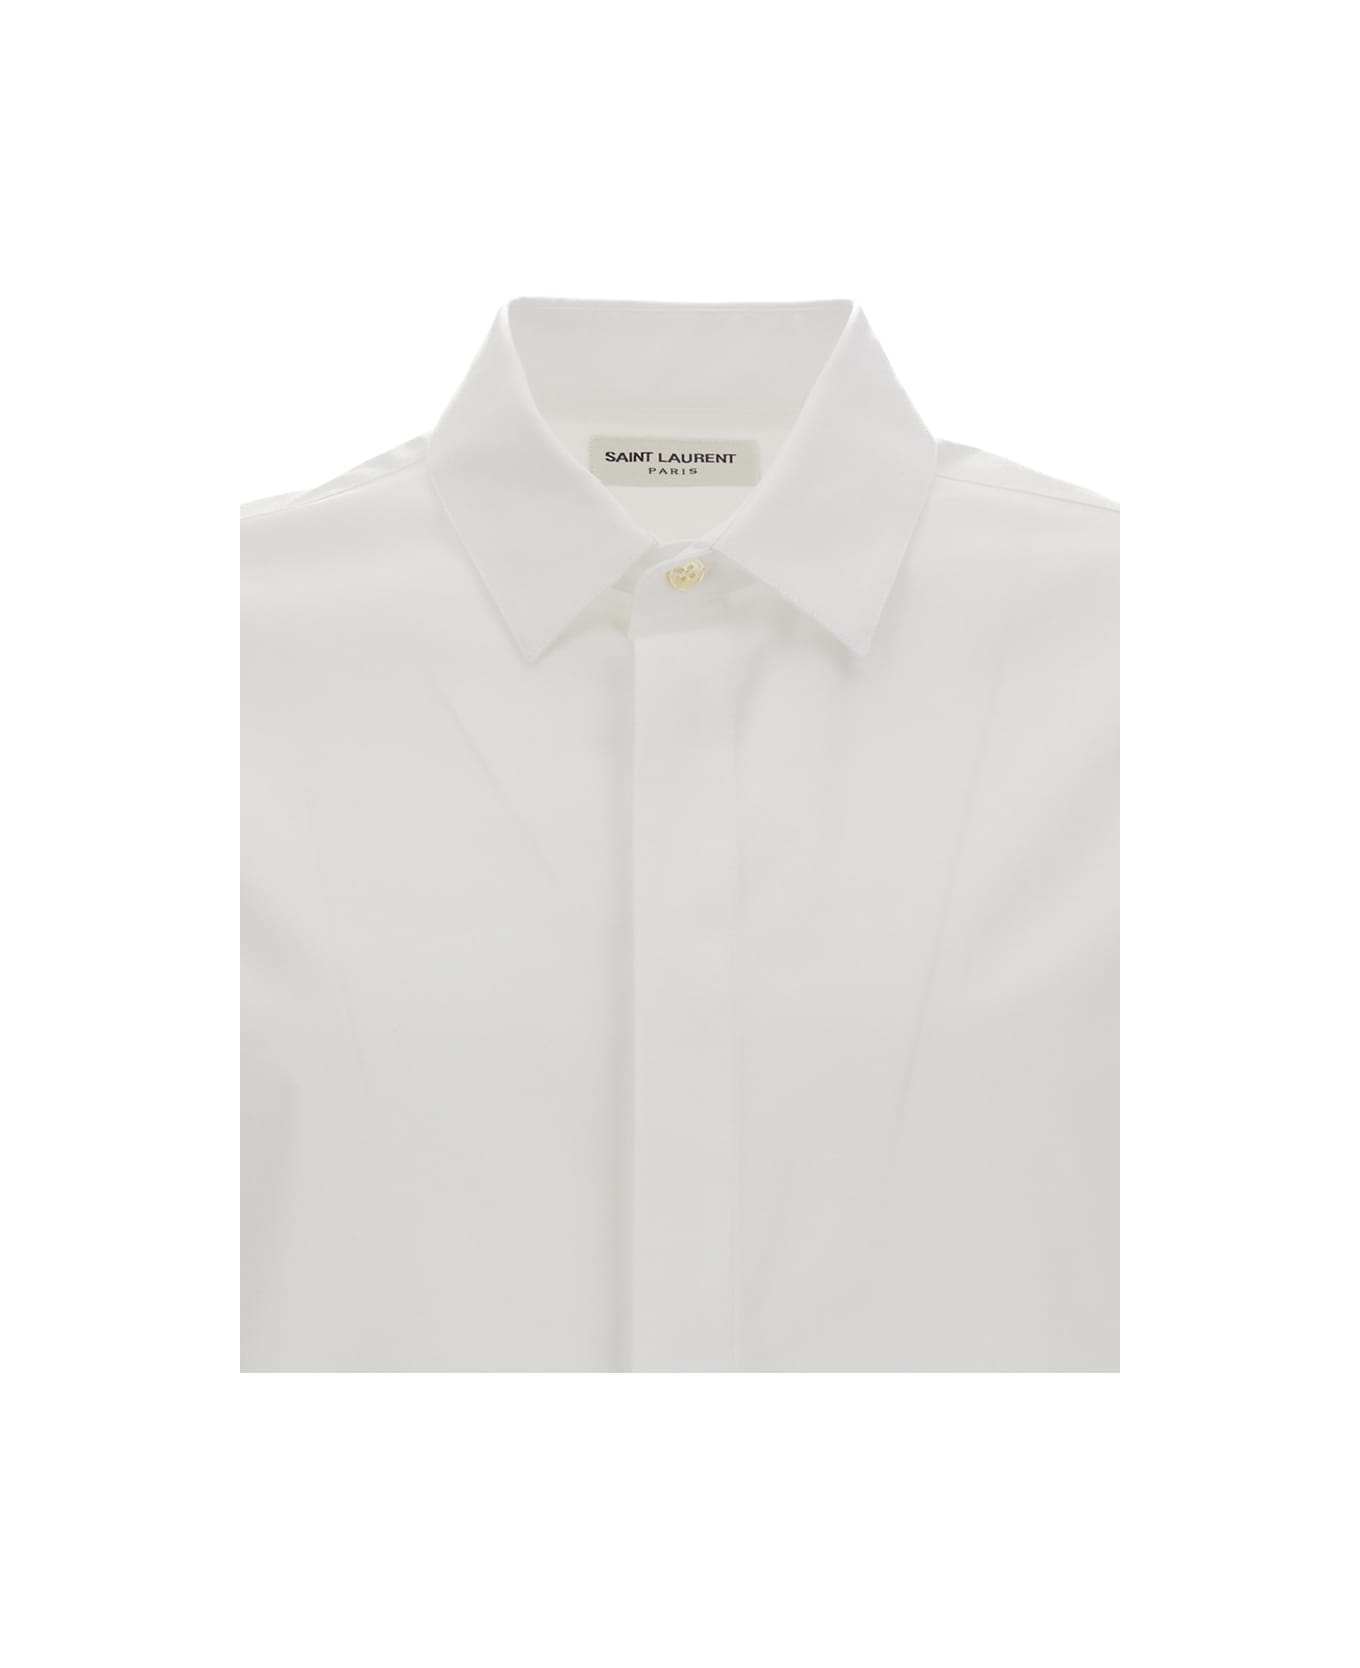 Saint Laurent White Pointed Collar Long Sleeve Shirt In Cotton Man - White シャツ